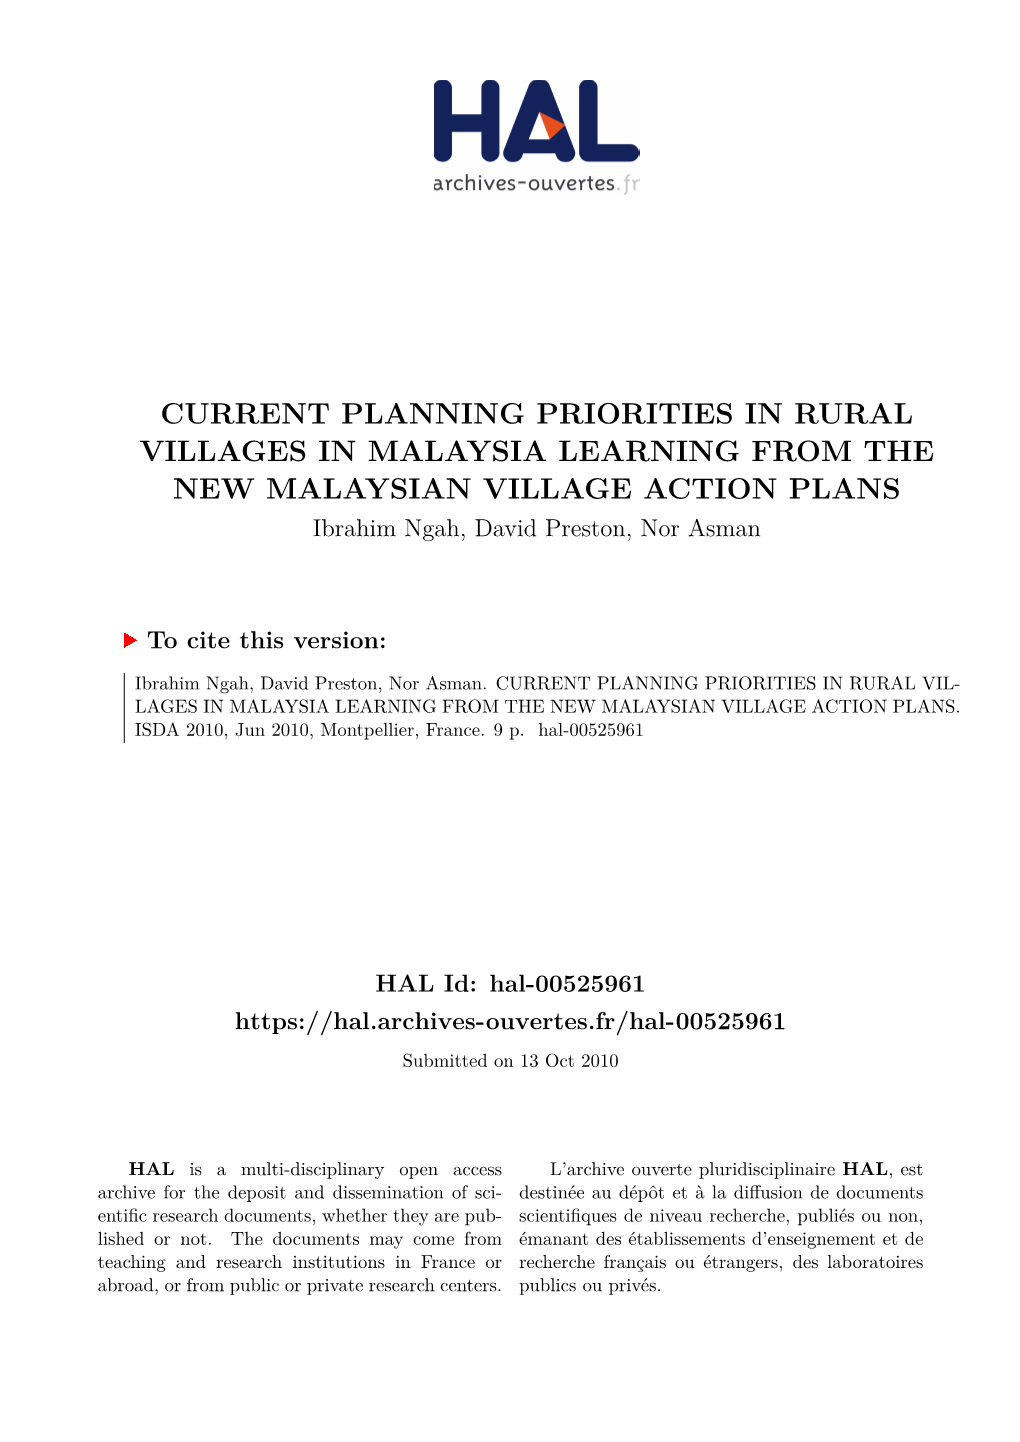 CURRENT PLANNING PRIORITIES in RURAL VILLAGES in MALAYSIA LEARNING from the NEW MALAYSIAN VILLAGE ACTION PLANS Ibrahim Ngah, David Preston, Nor Asman